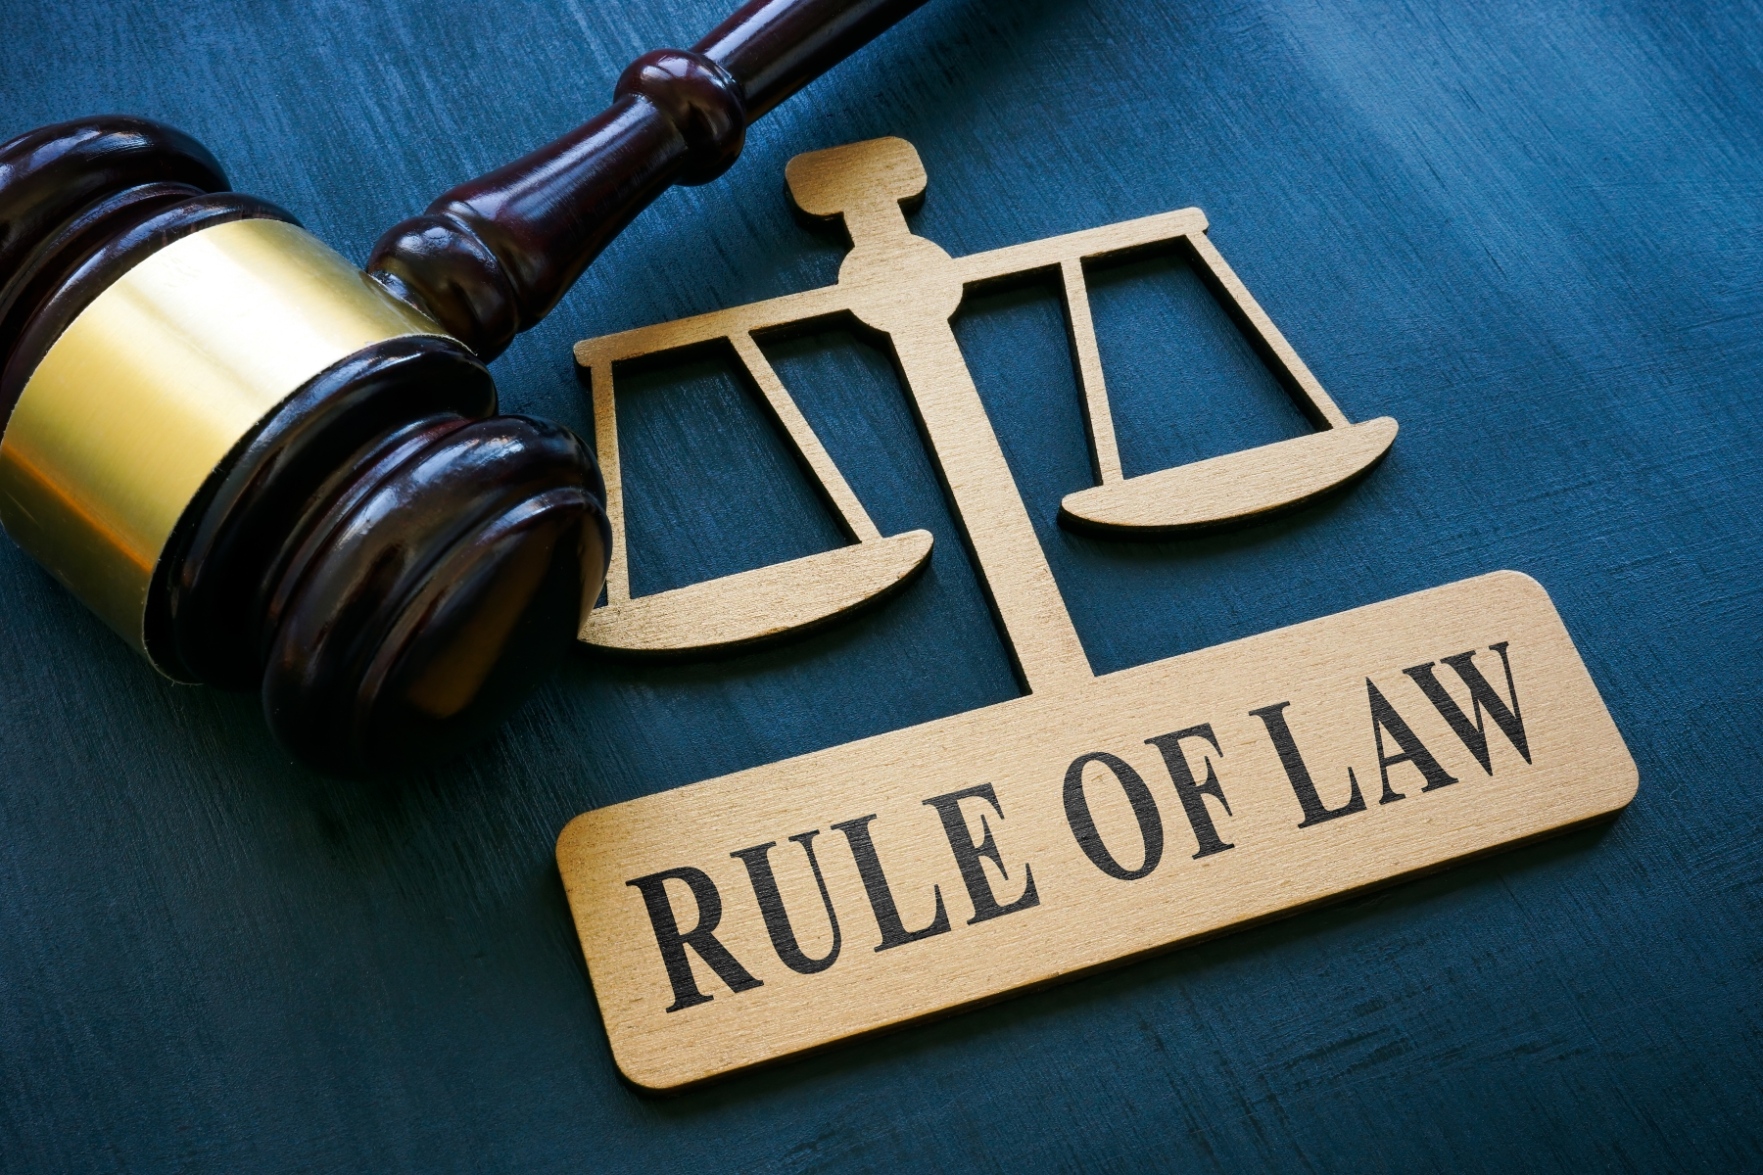 research on rule of law